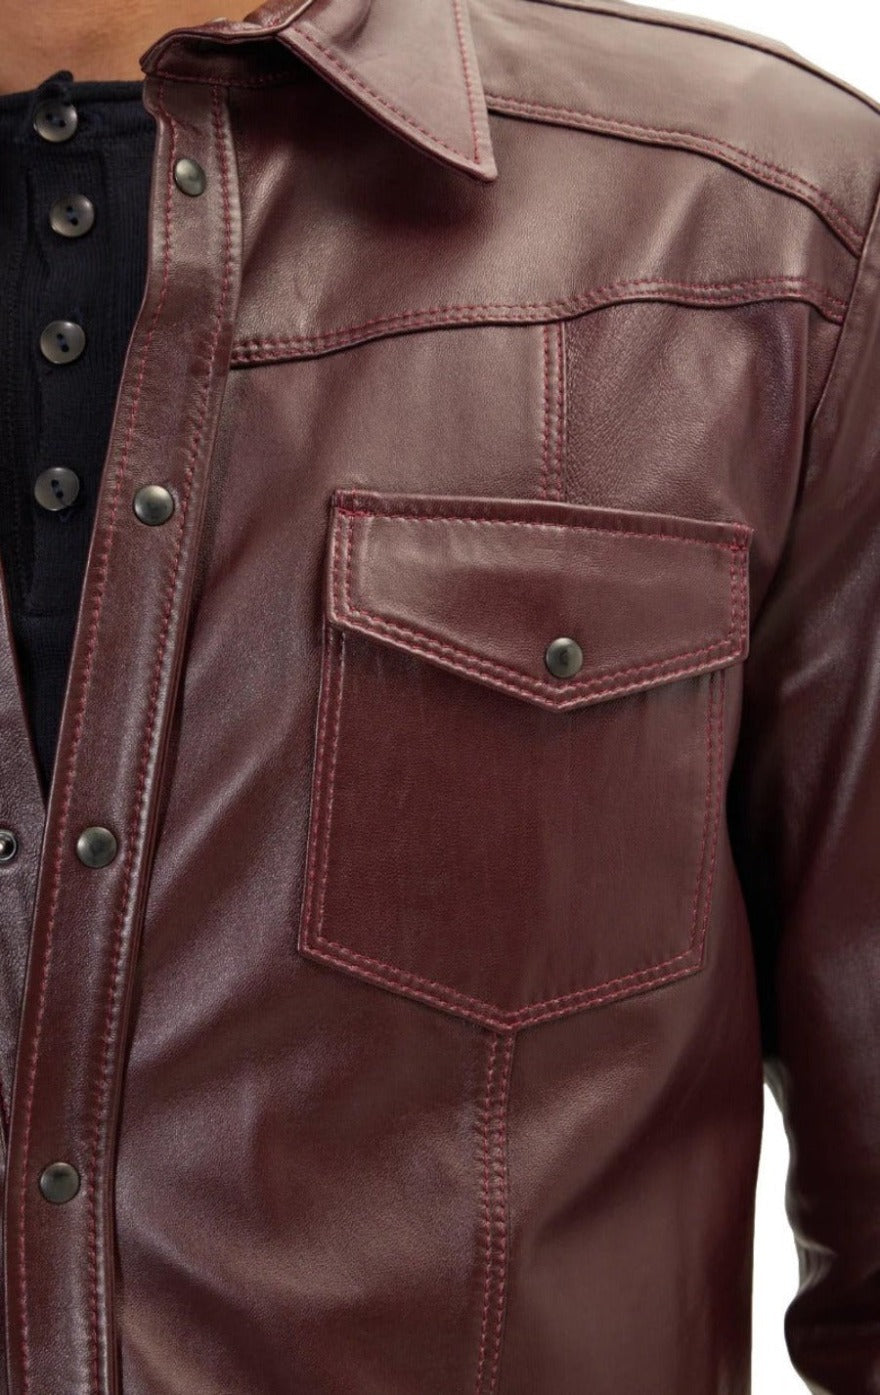 Picture of a model wearing our Maroon Leather Shirt with long sleeves, close up view.